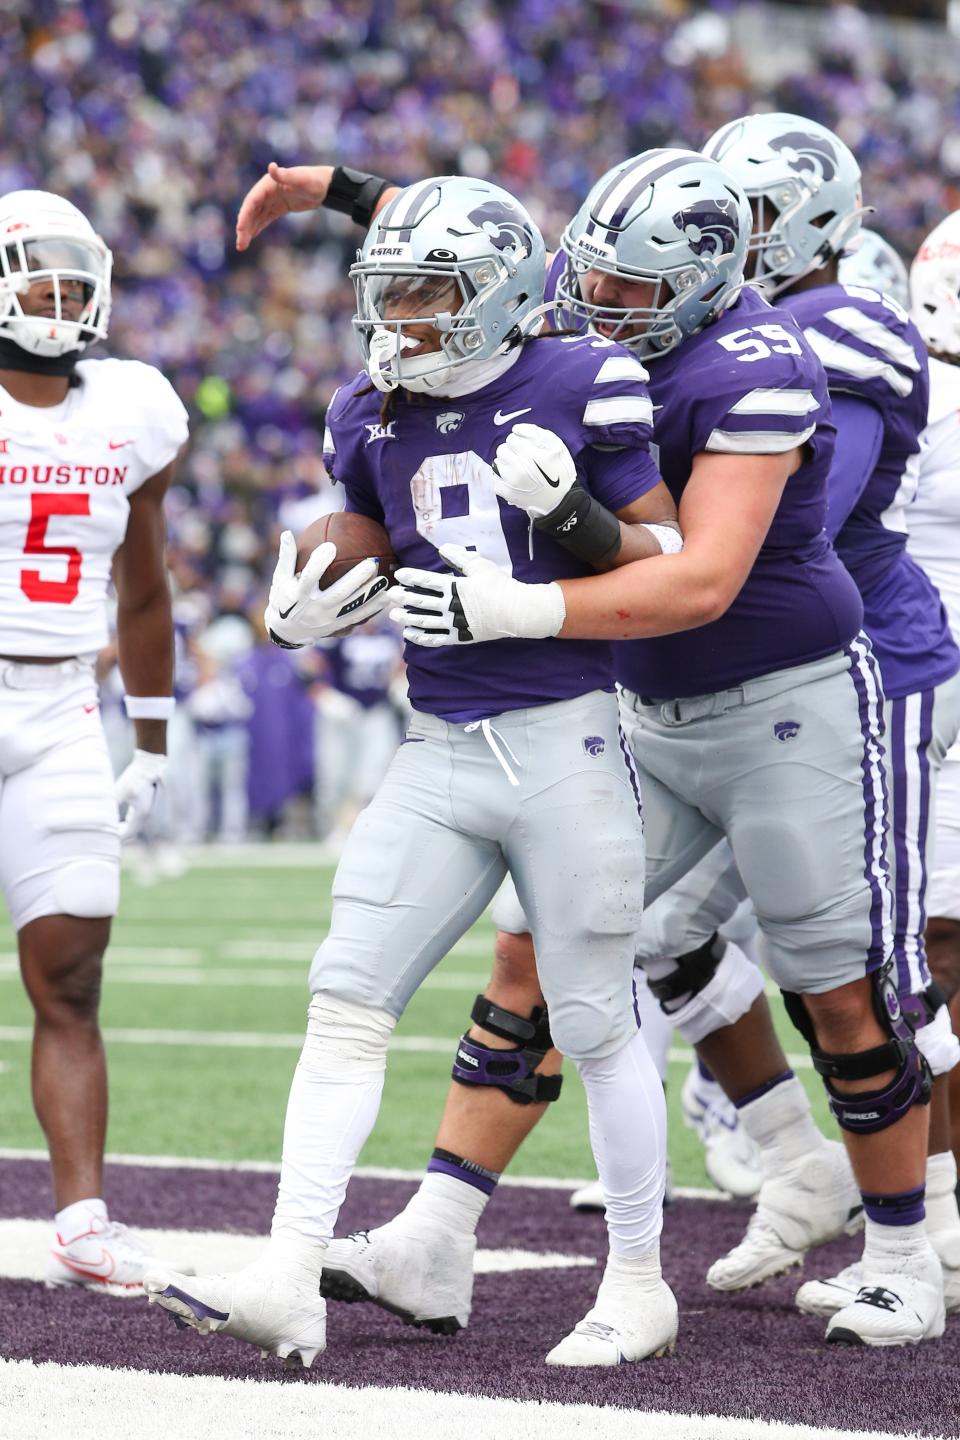 Oct 28, 2023; Manhattan, Kansas, USA; Kansas State Wildcats running back Treshaun Ward (9) is congratulated by offensive lineman Hayden Gillum (55) after scoring a touchdown against the Houston Cougars in the second quarter at Bill Snyder Family Football Stadium. Mandatory Credit: Scott Sewell-USA TODAY Sports